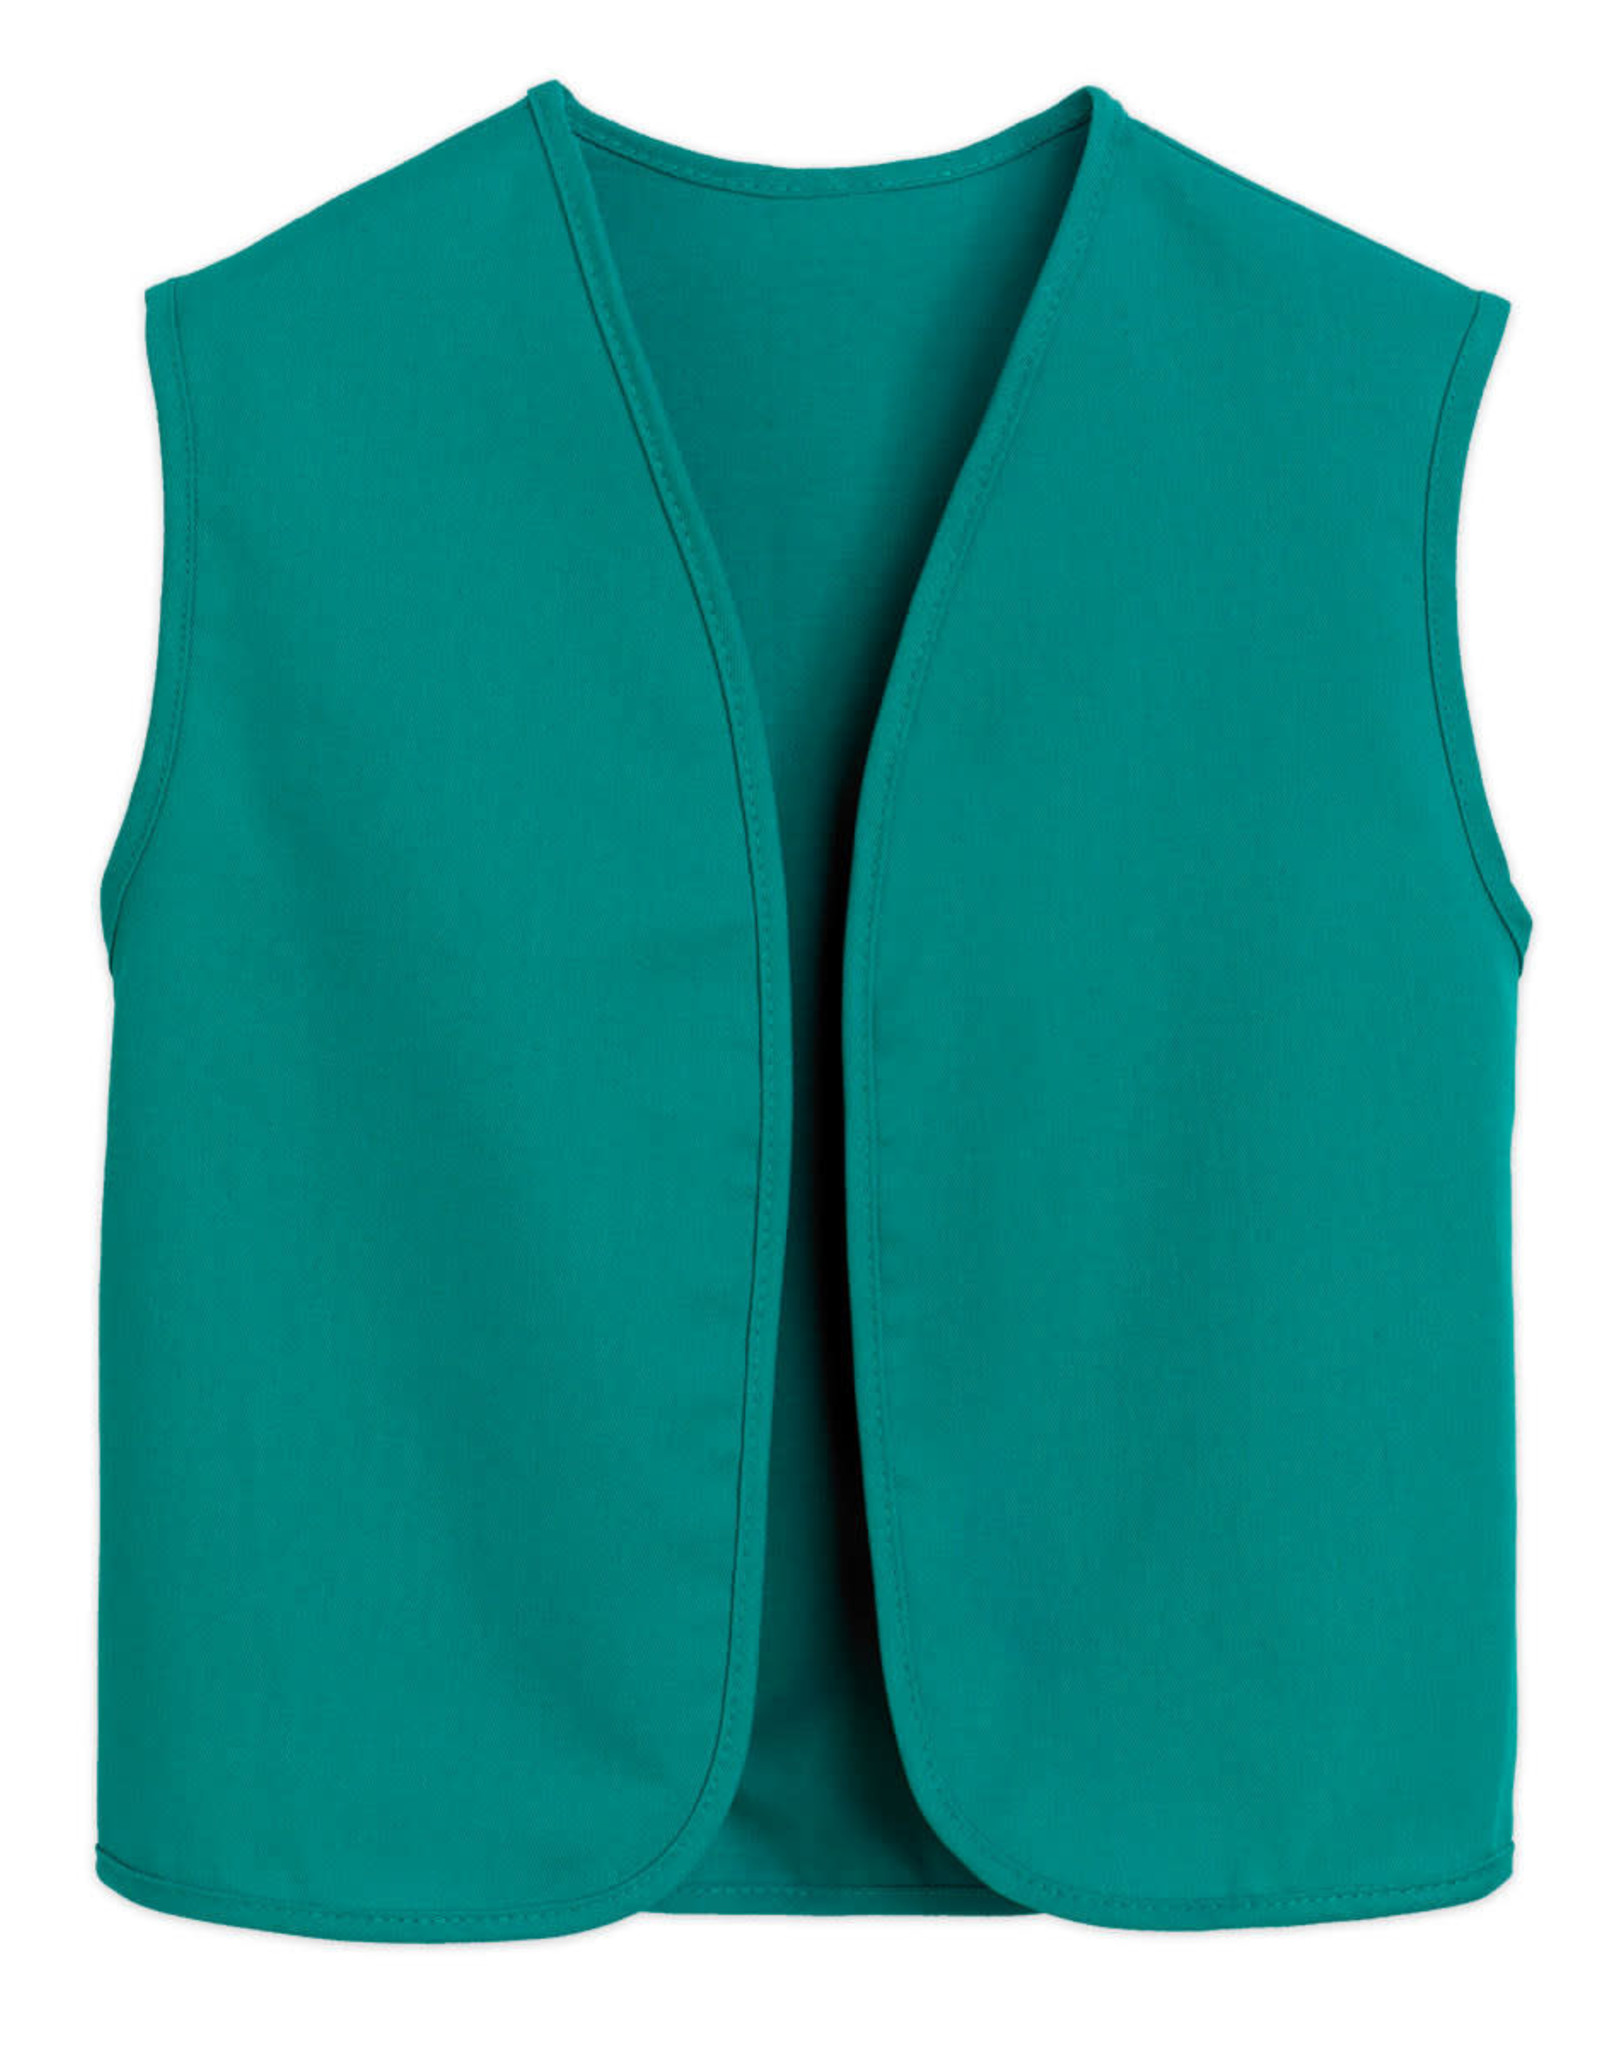 GIRL SCOUTS OF THE USA Official Junior Vest